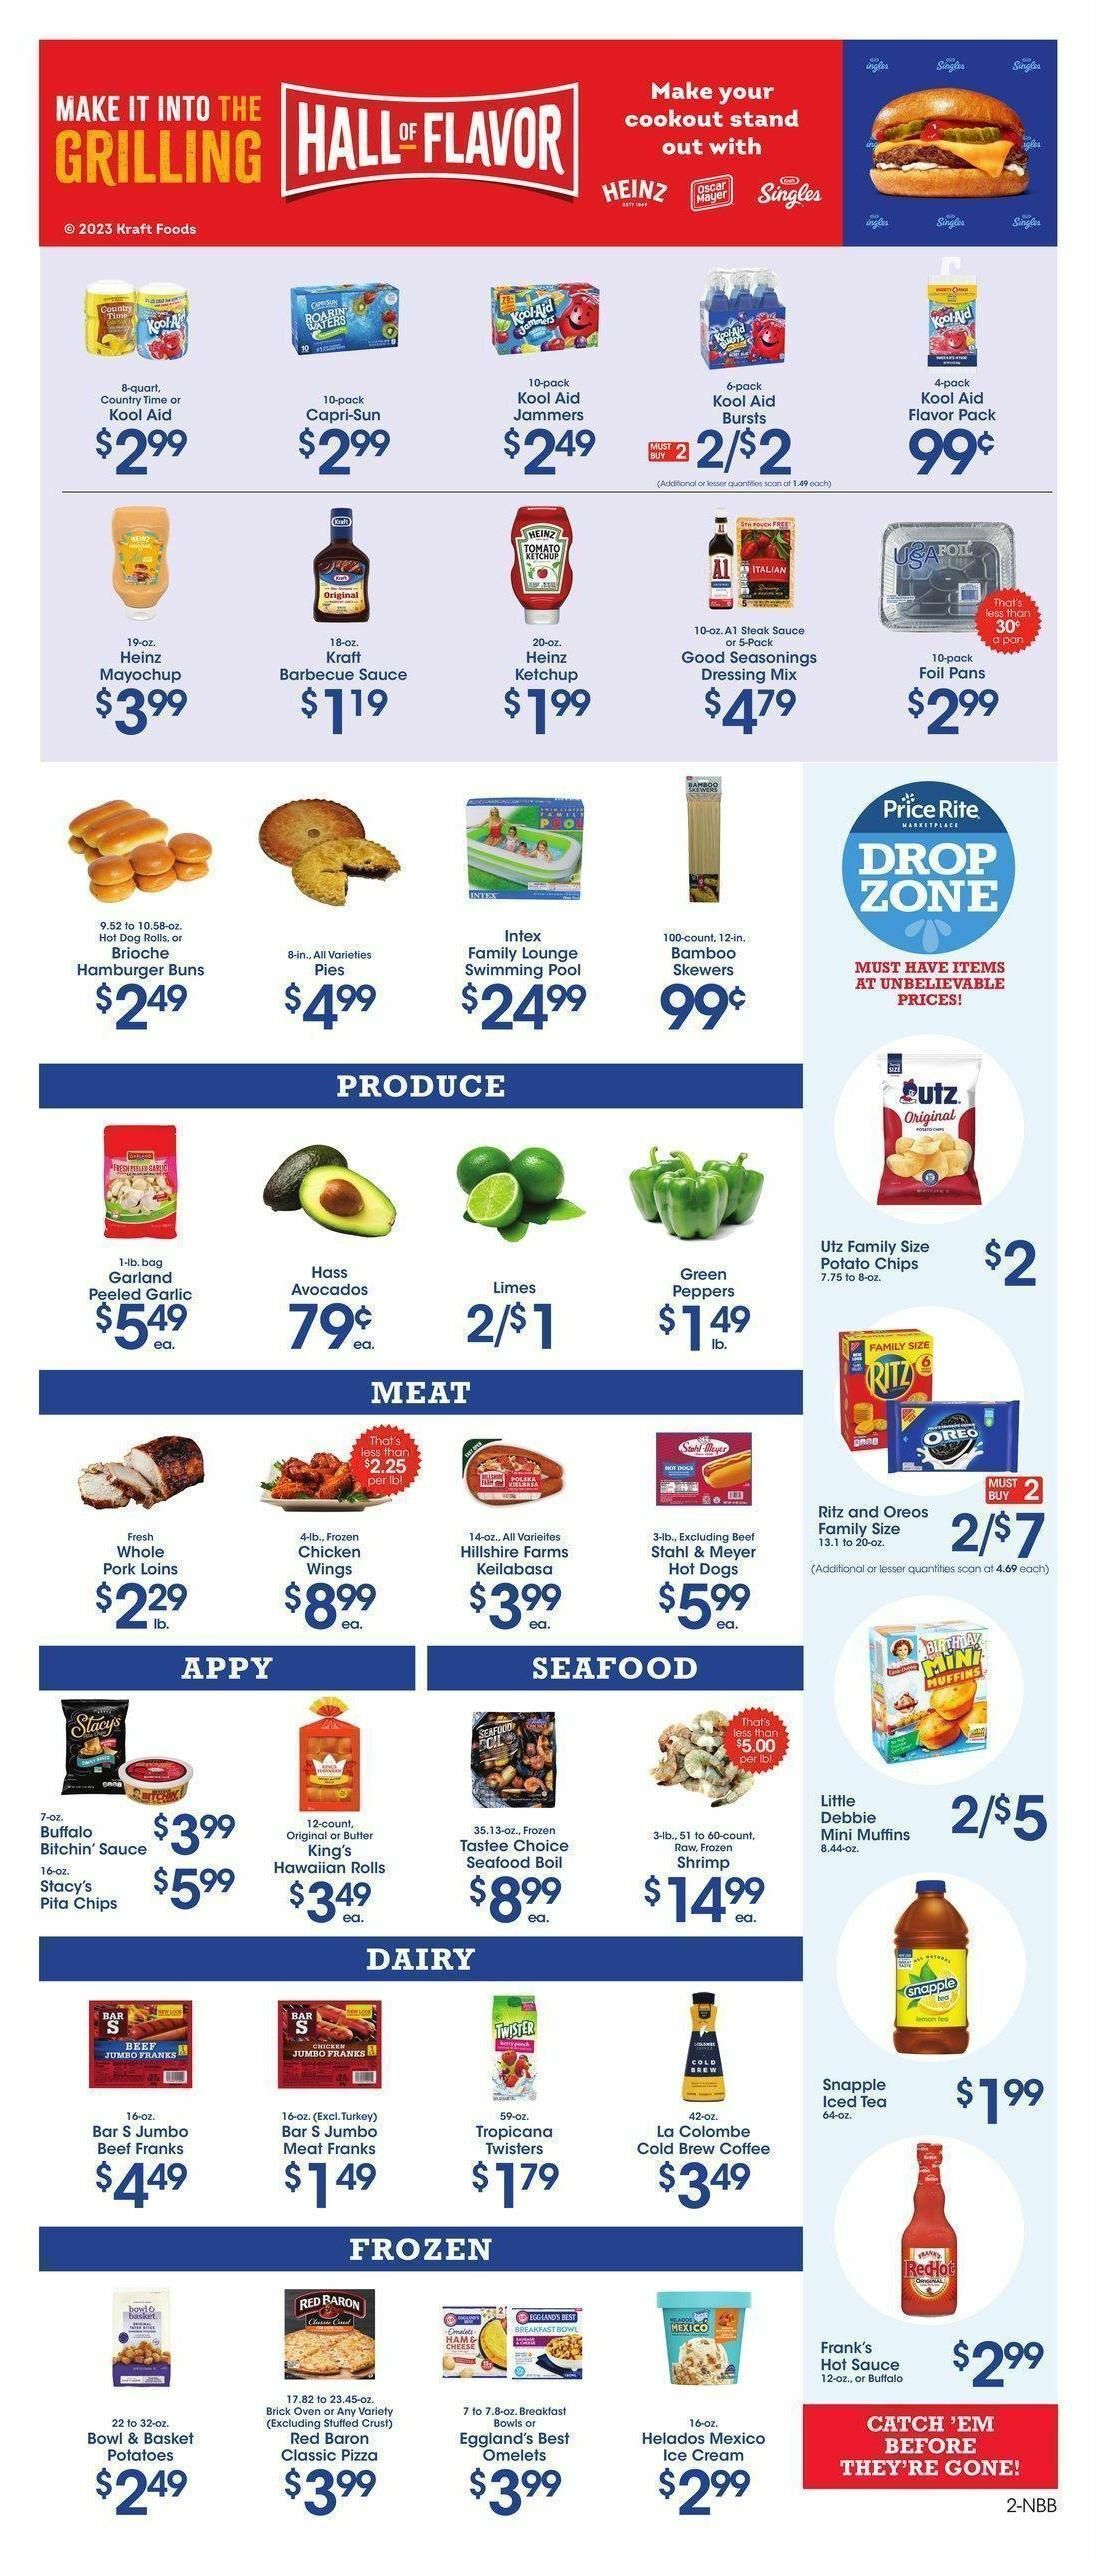 Price Rite Weekly Ad from June 23